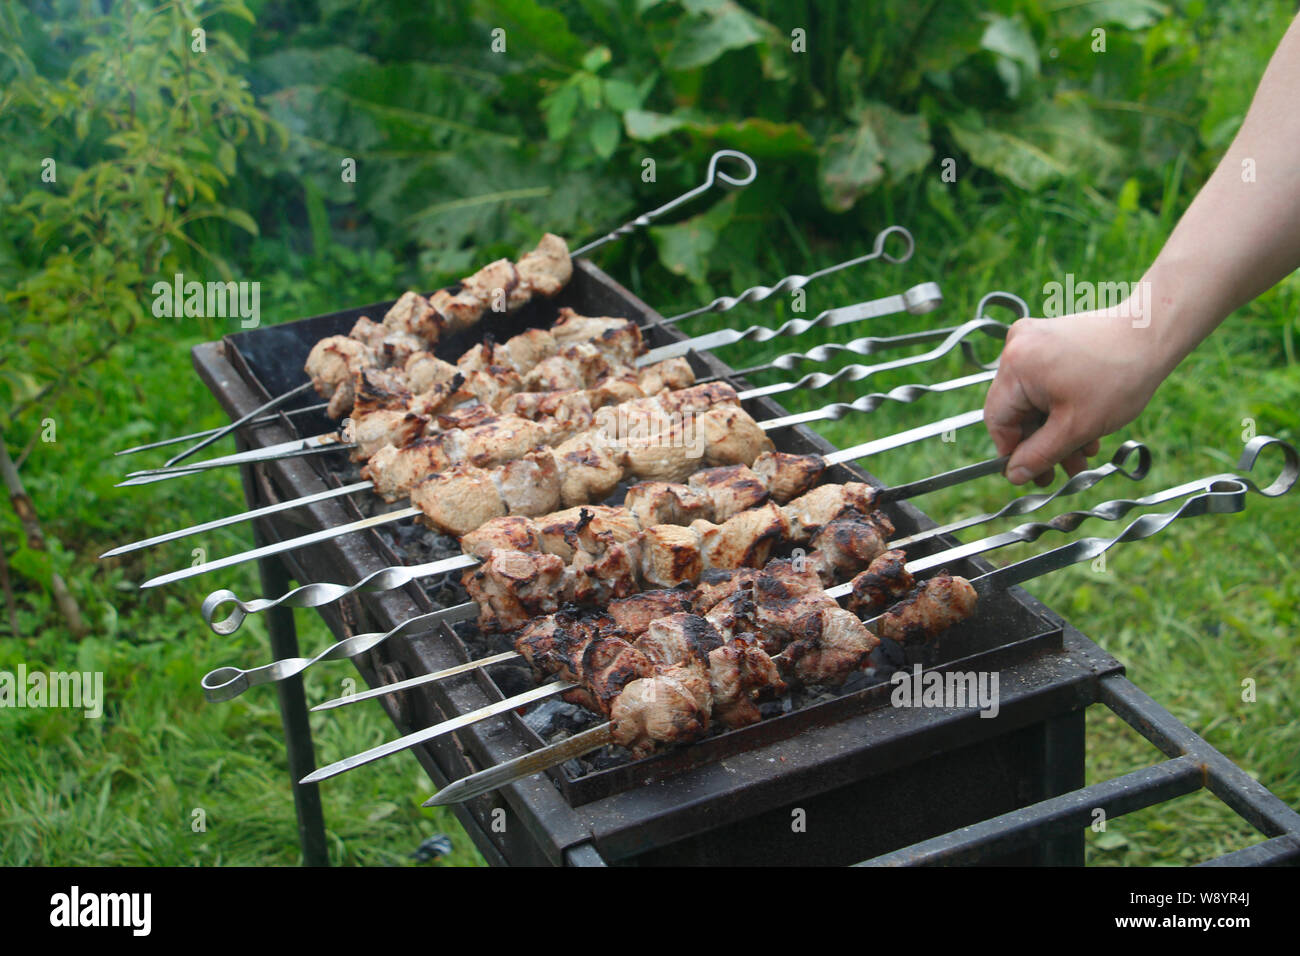 Cook cooks barbecue skewers. Marinated kebab is grilled on charcoal. Shish kebab barbecue was made of lamb, pork, beef, chicken. Roast beef skewers on Stock Photo